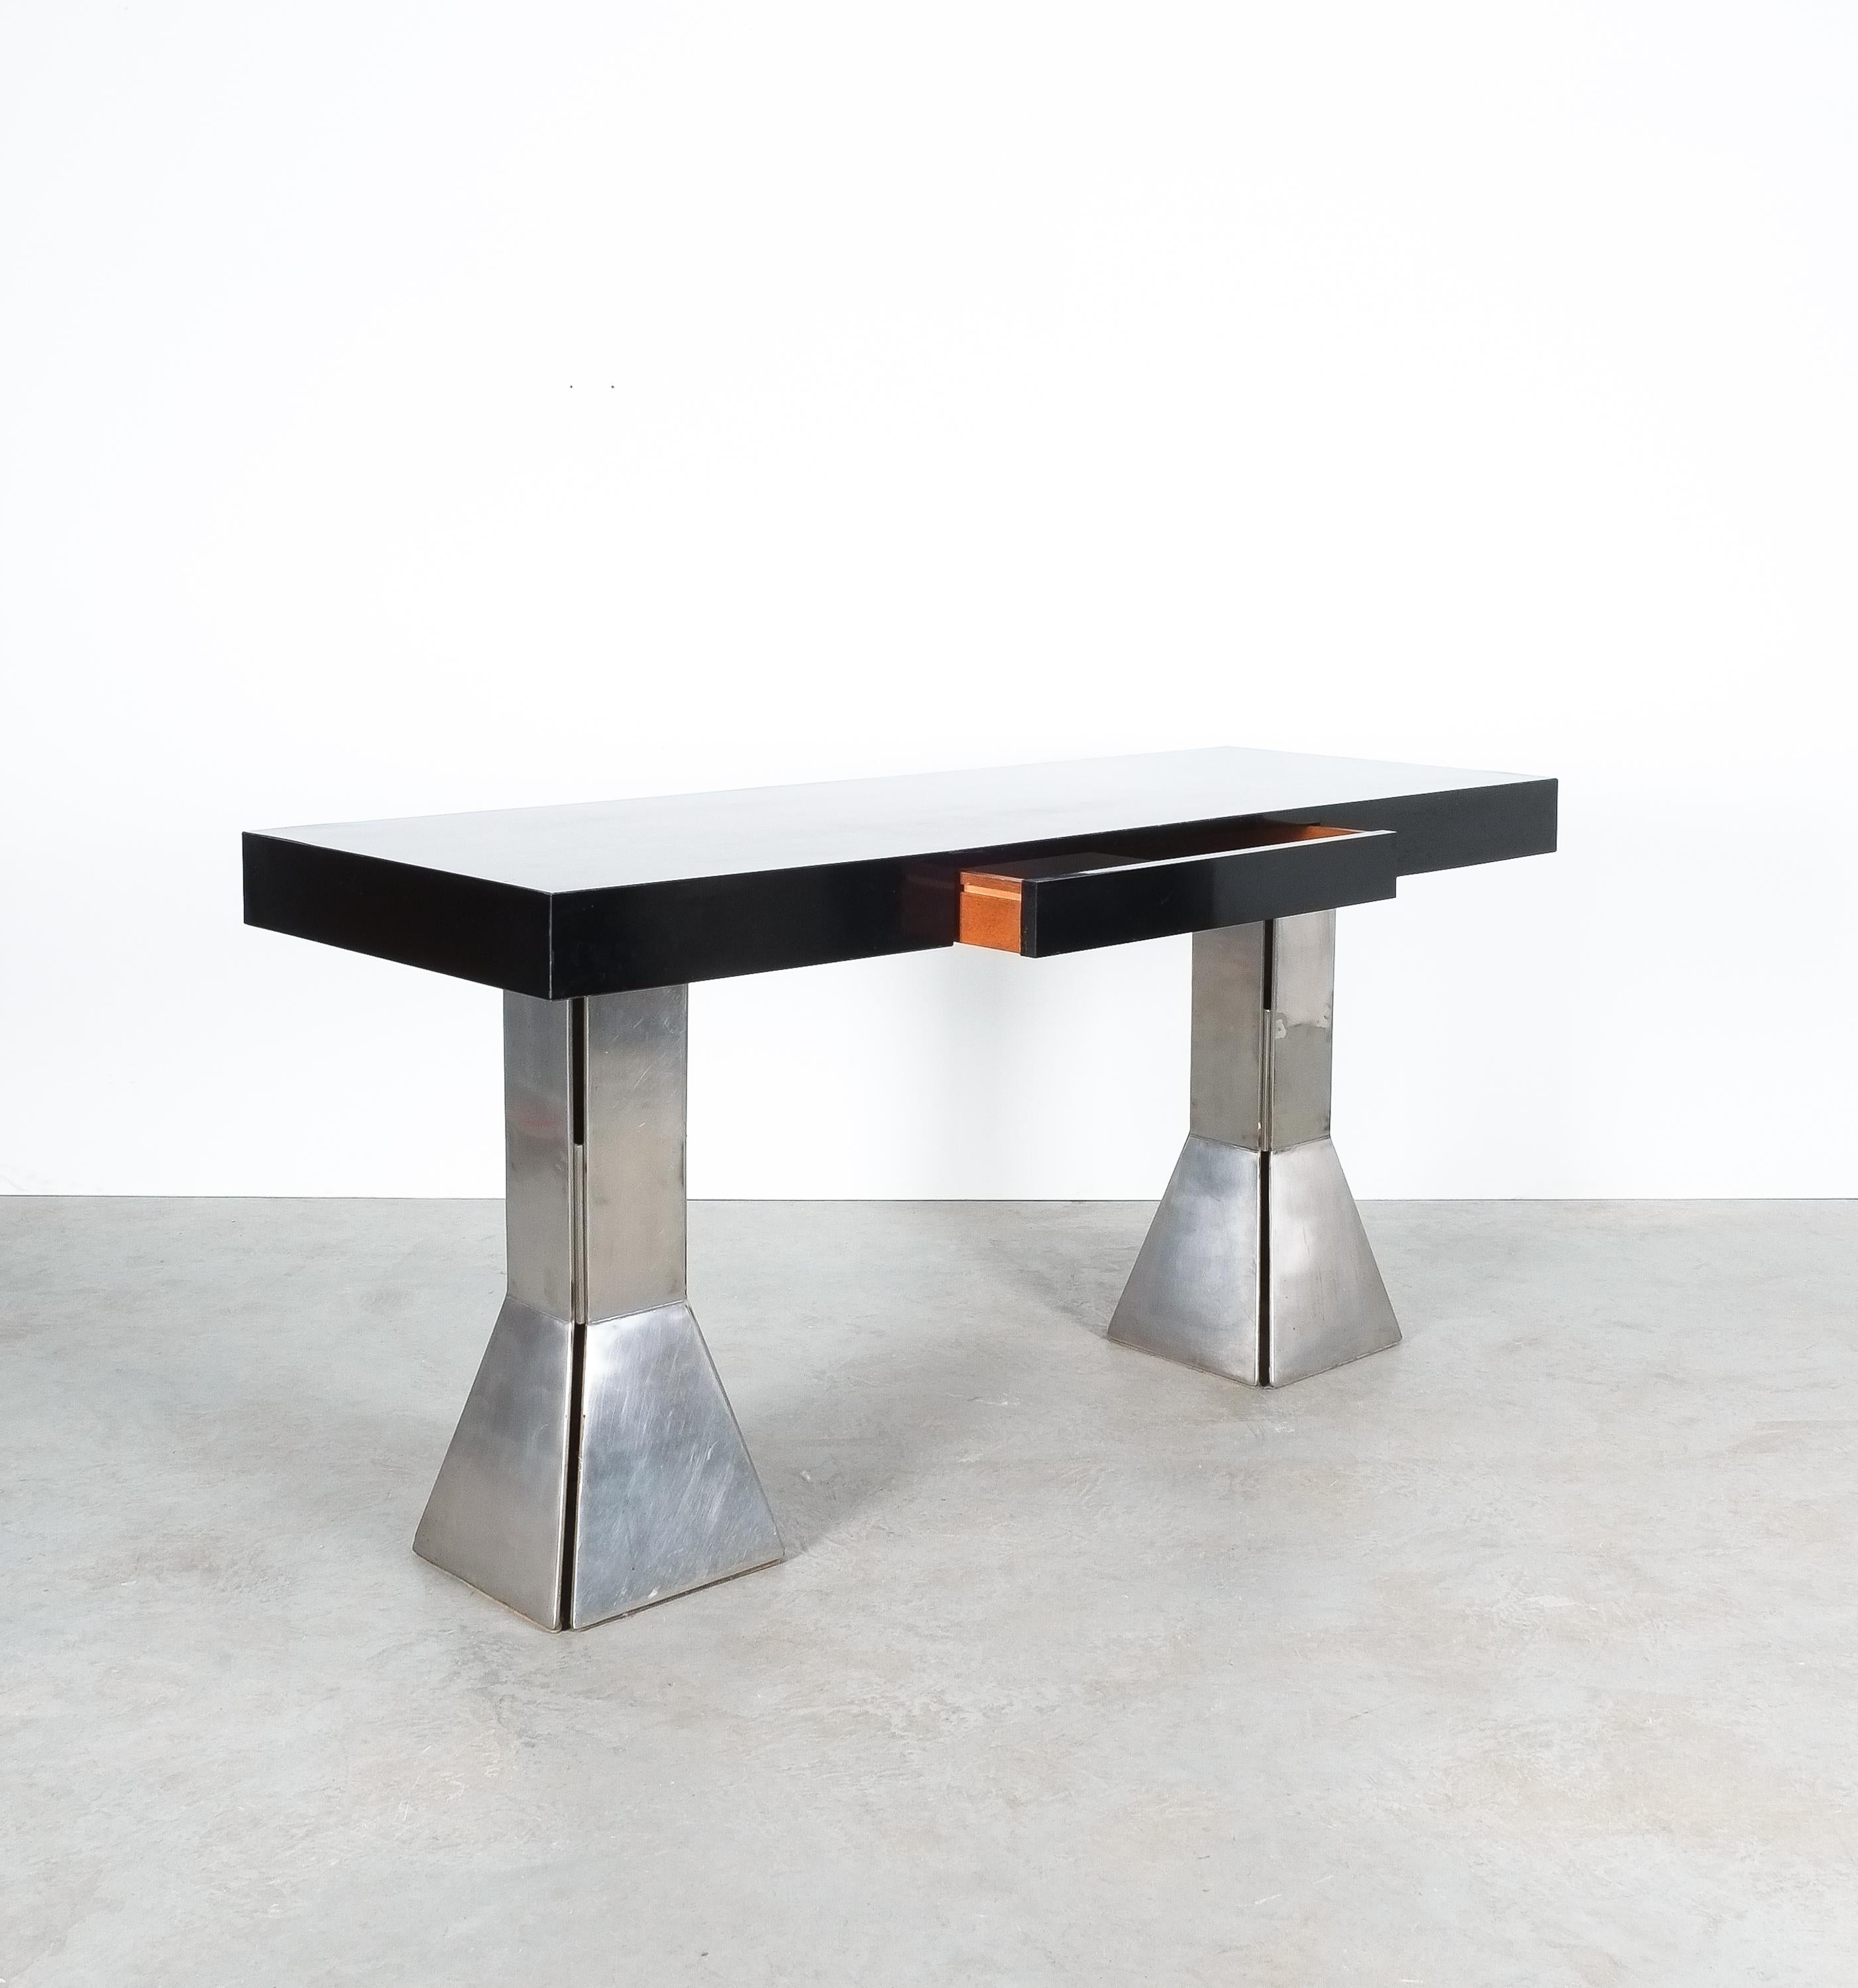 Unique black formica bespoke writing desk with heavy steel feet and drawer, Italy, circa 1970-1980.

Perfectly sized desk or console table with a large drawer (21